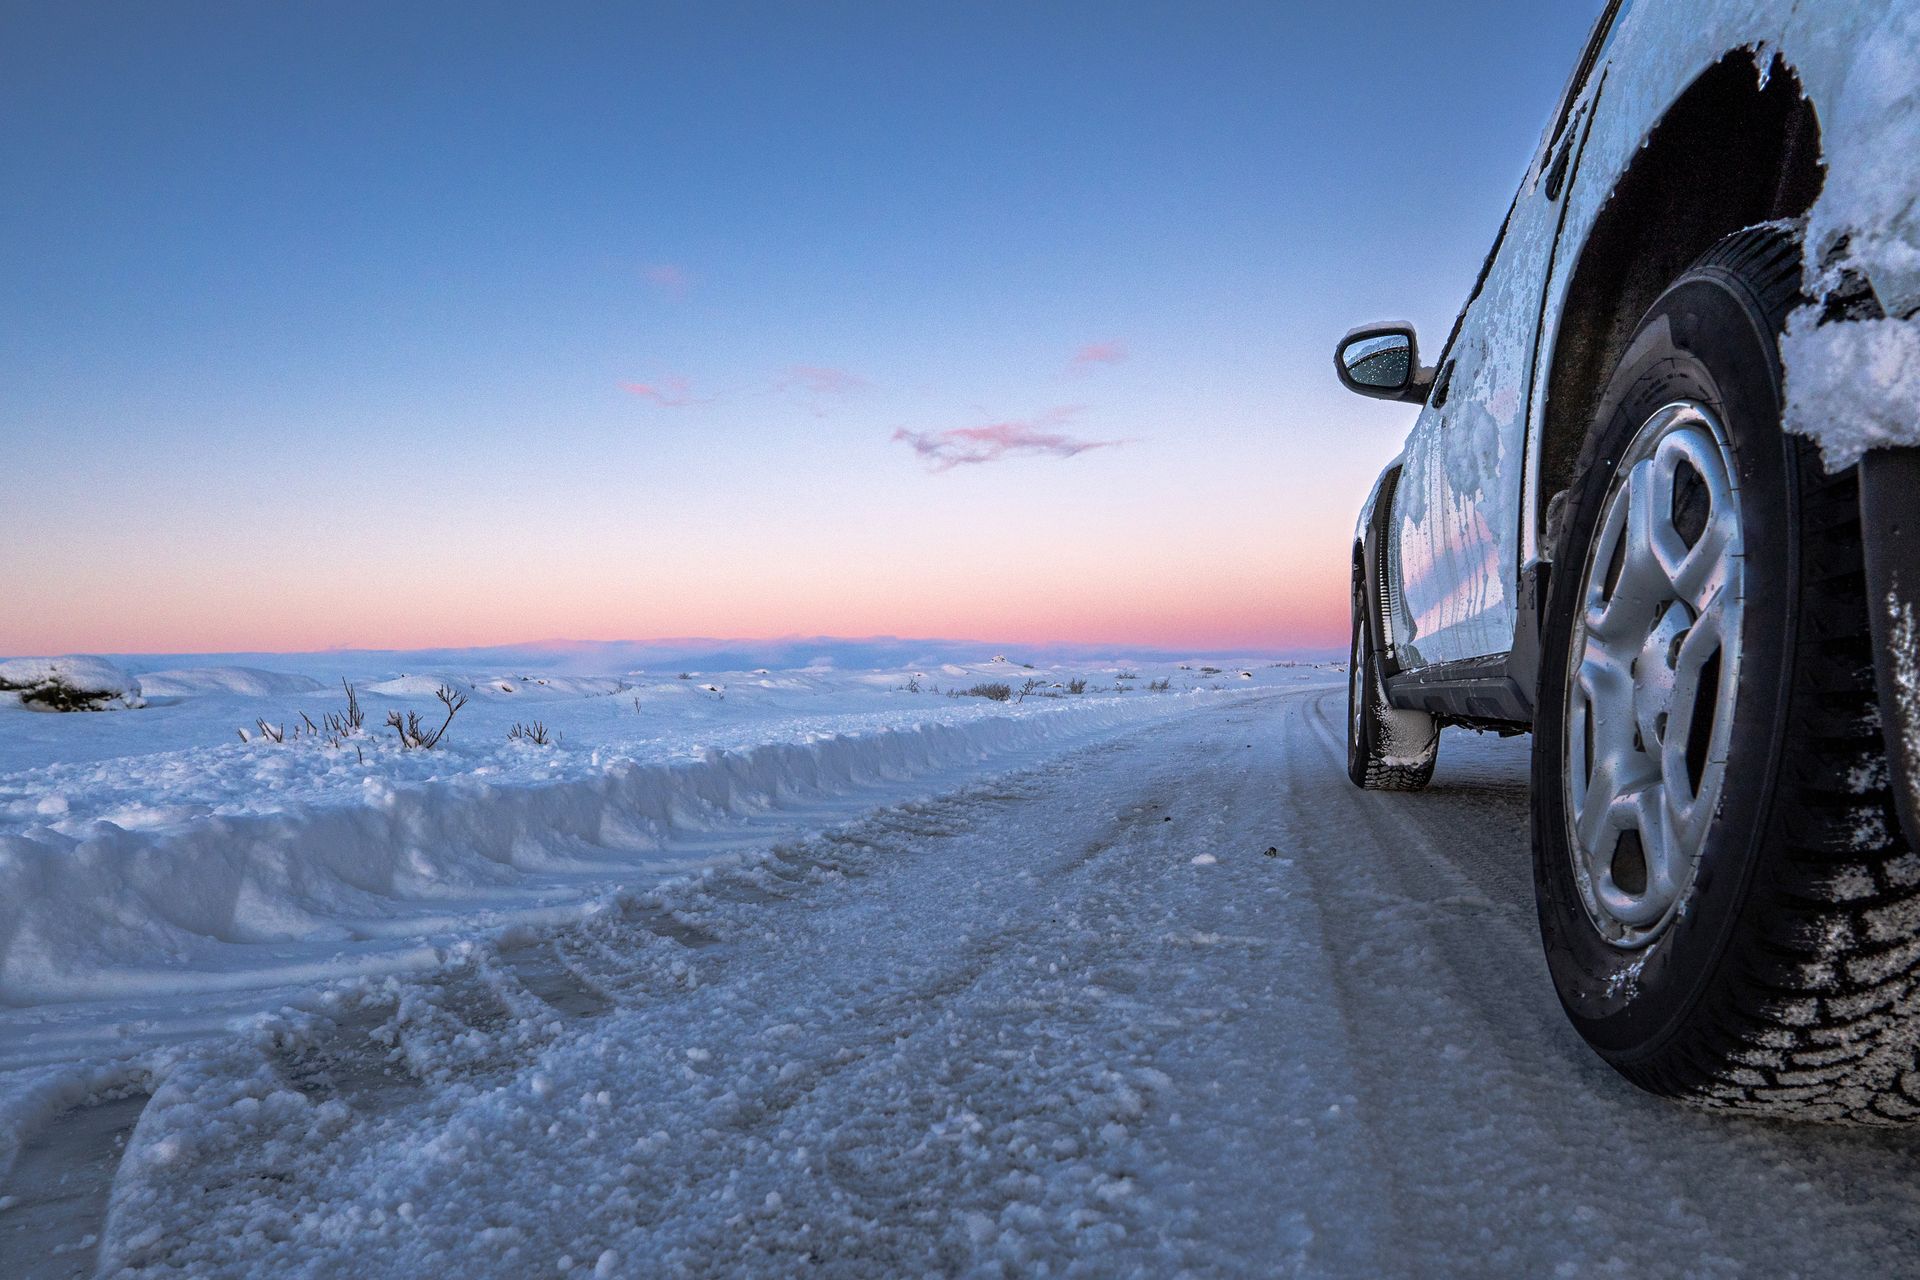 Sunset and car under the snow in Iceland